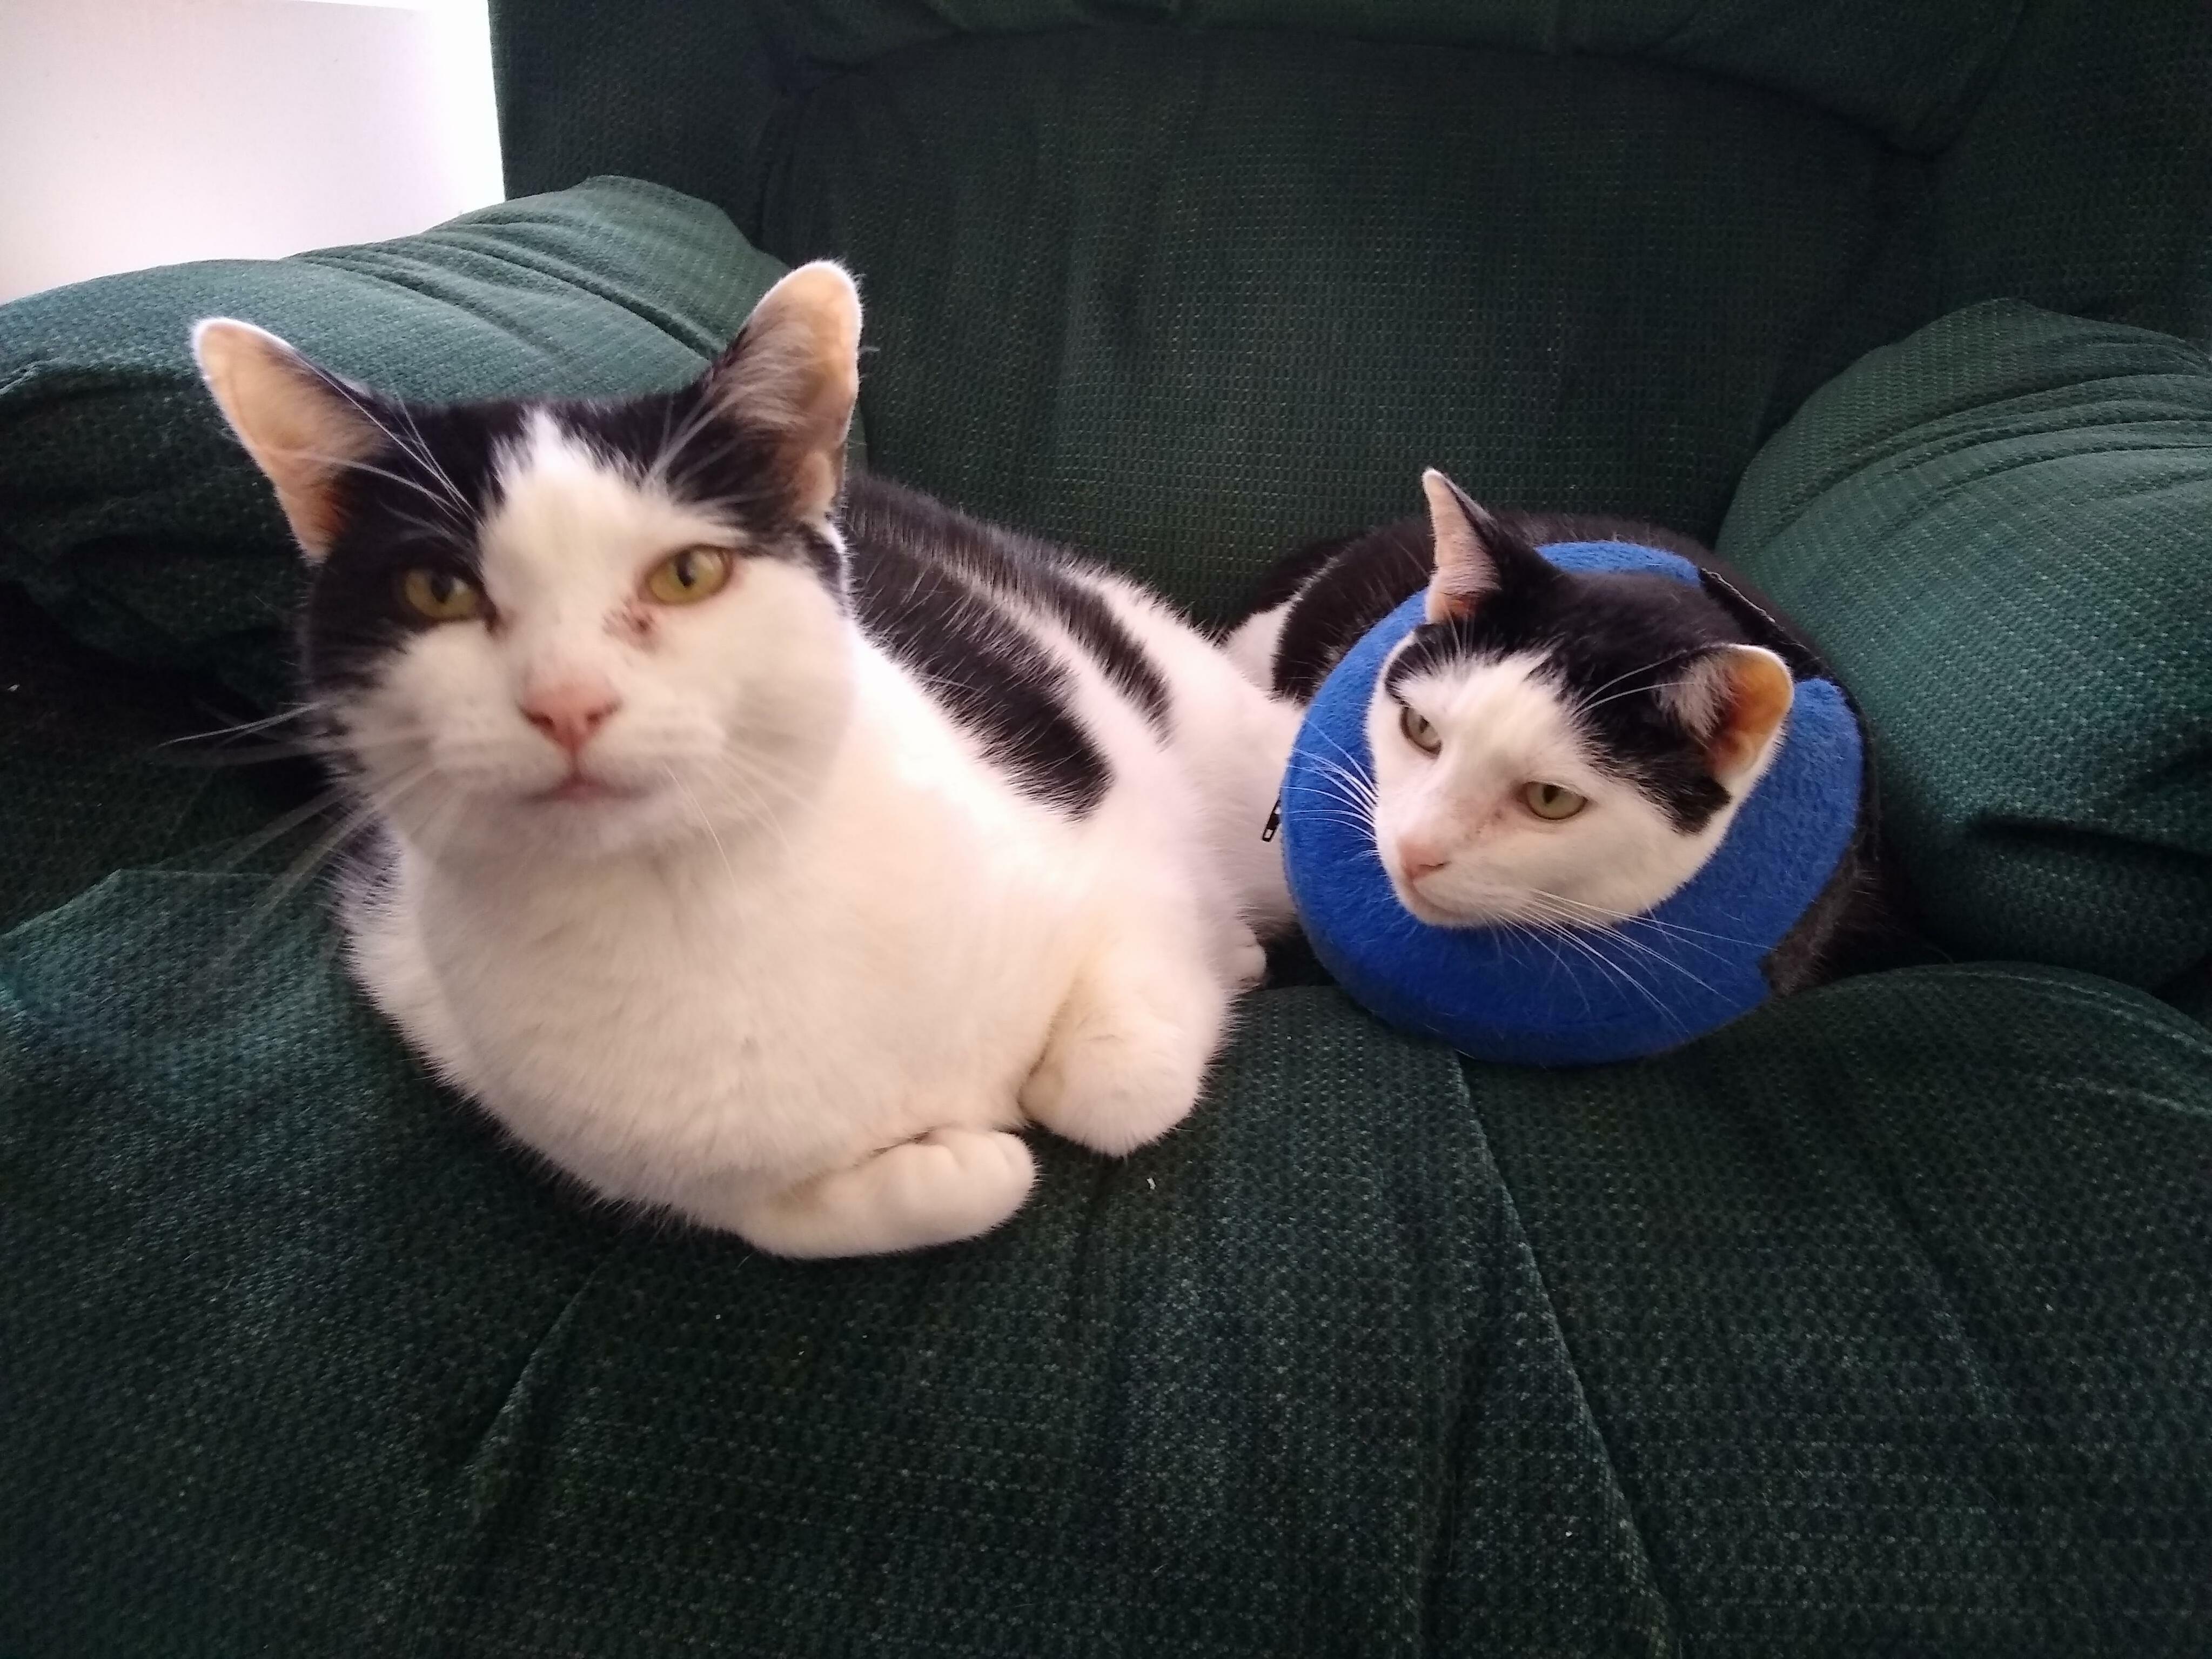 Faith couldnt stop biting her heel like a goon, so she had to go back into her anti biting collar. but luckily her sister buffy was there to help with snuggles!